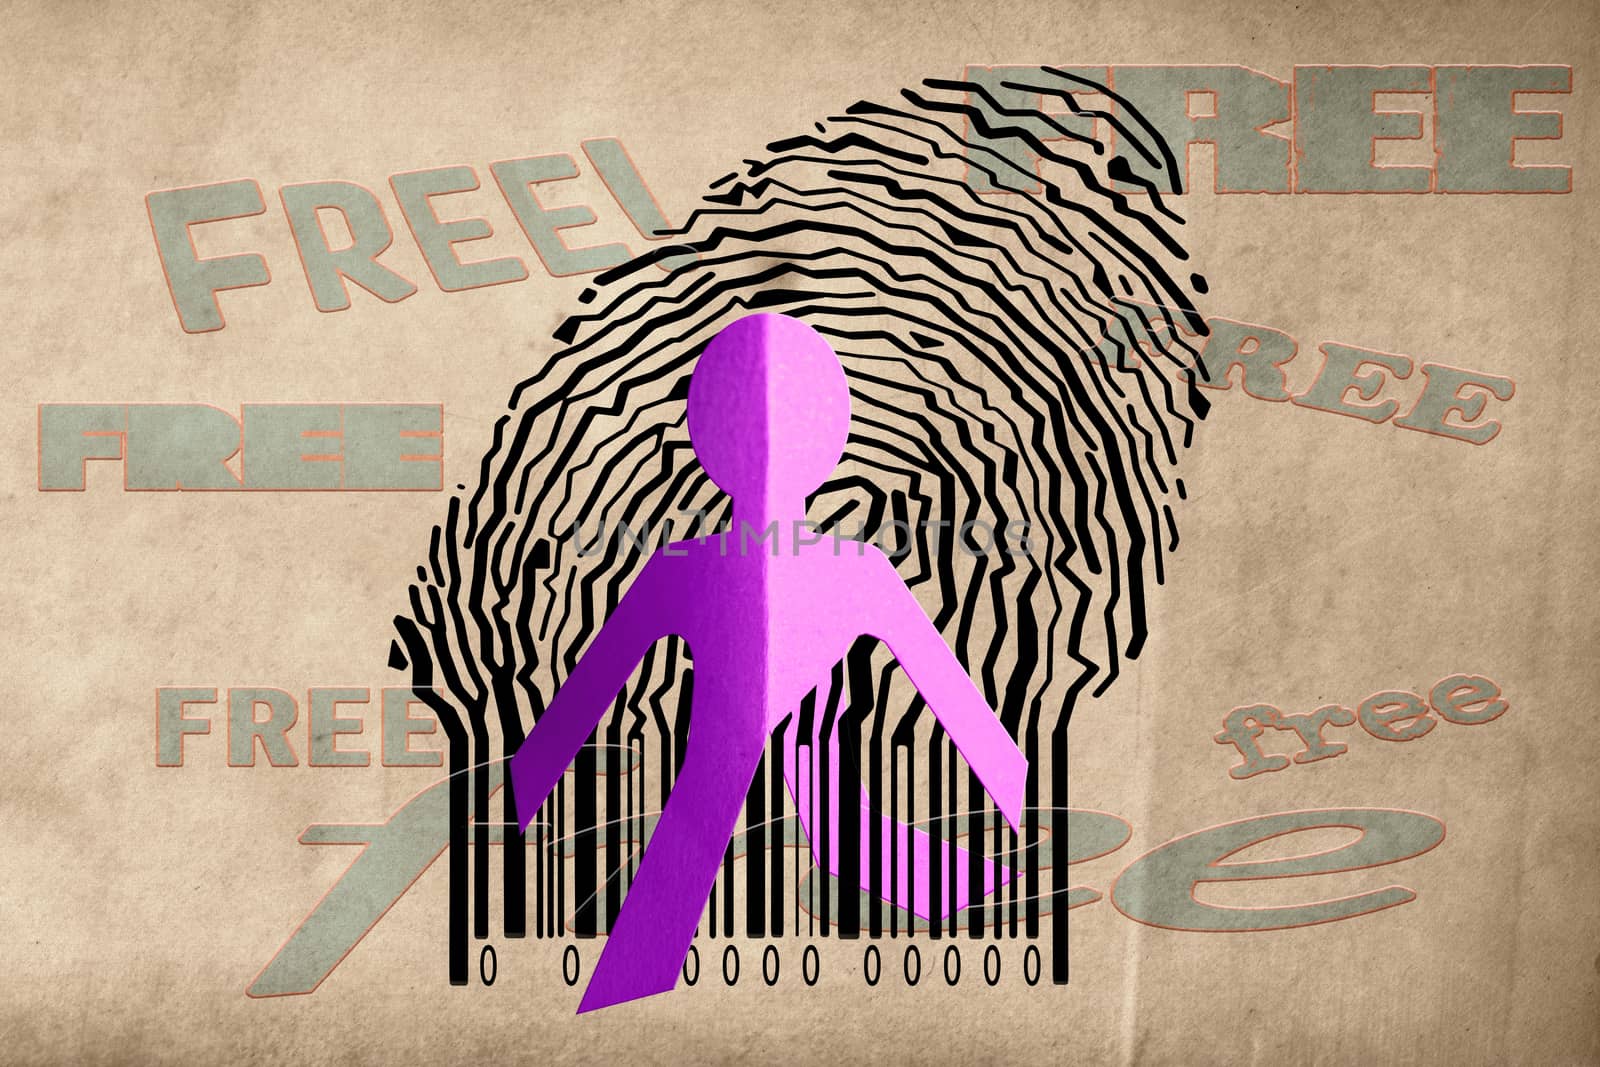 Paperman coming out of a bar code with Free Word by yands